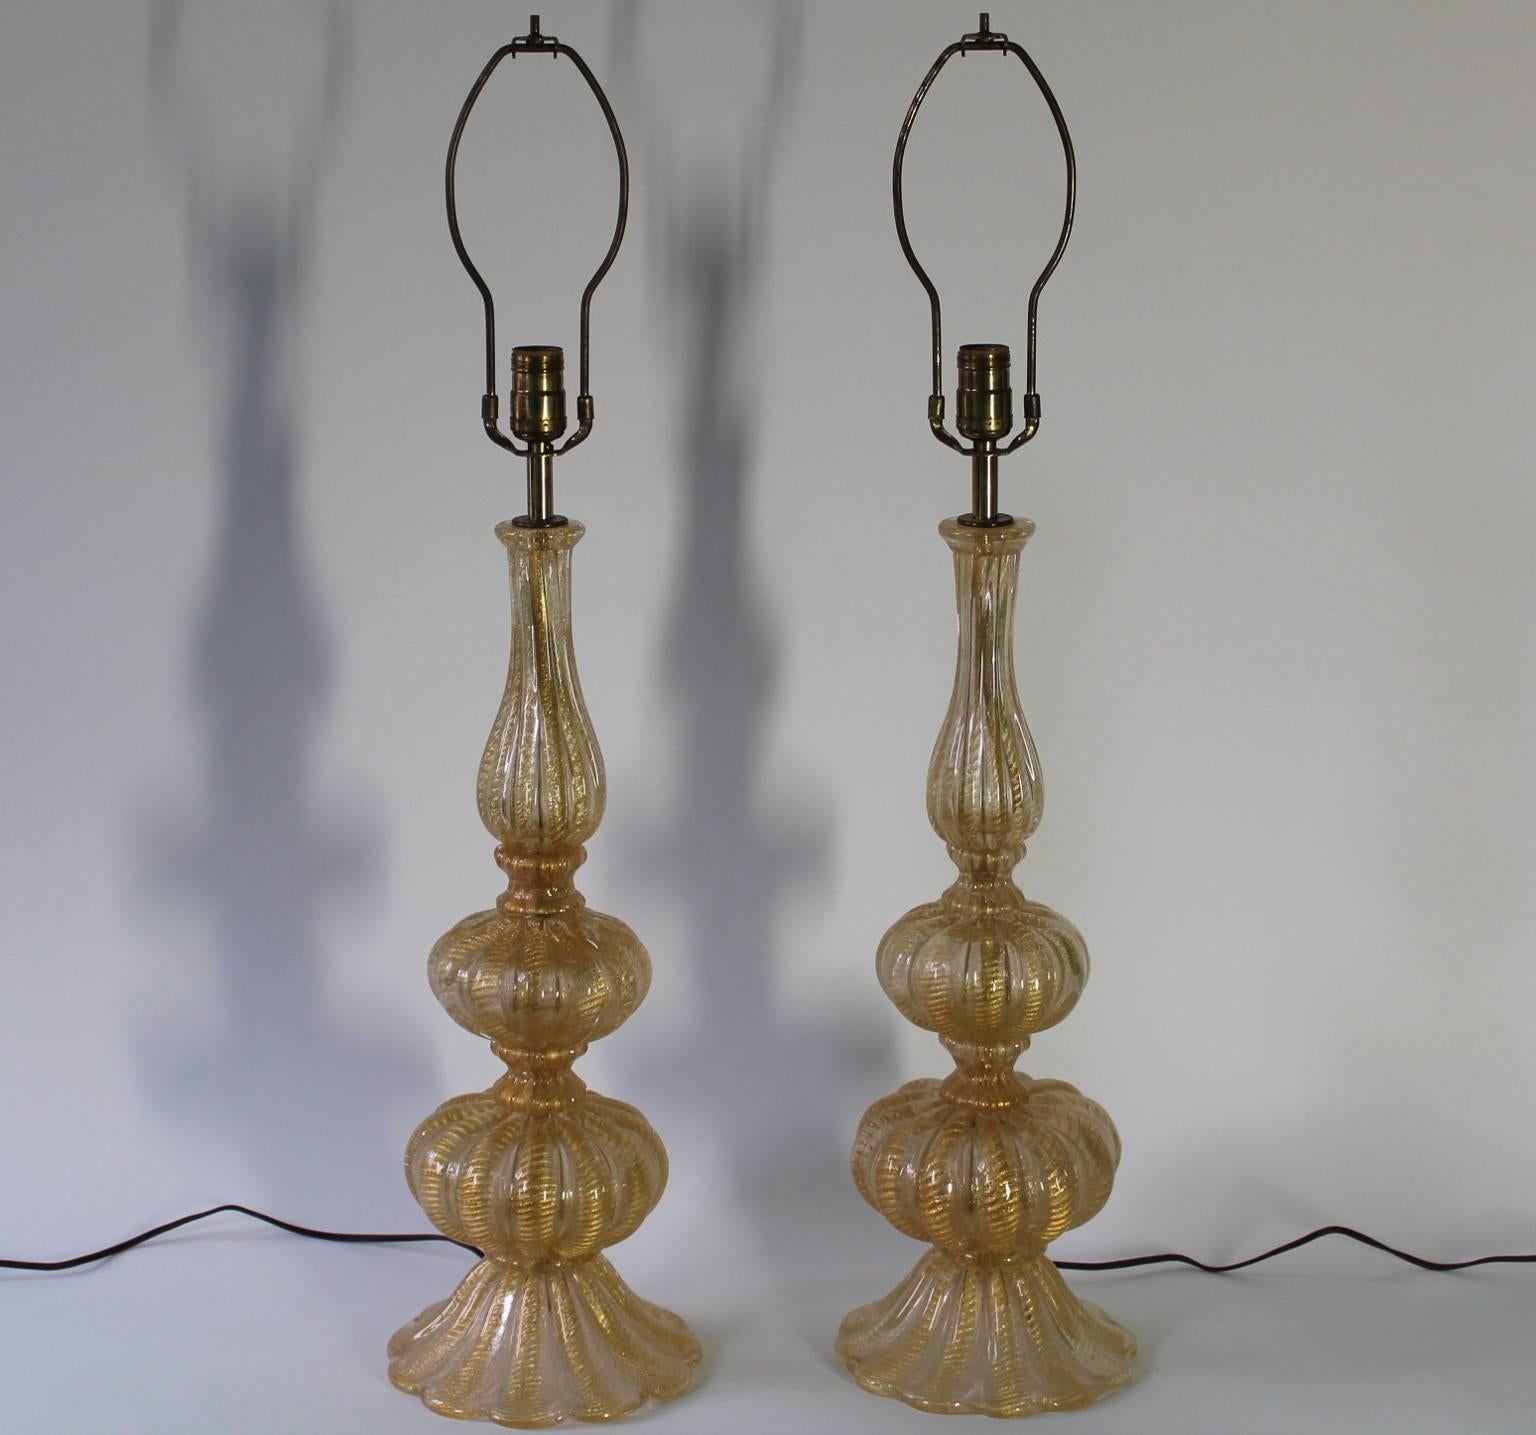 Midcentury Pair of Murano Glass Cordonato d'oro Table Lamps by Barovier & Toso 1